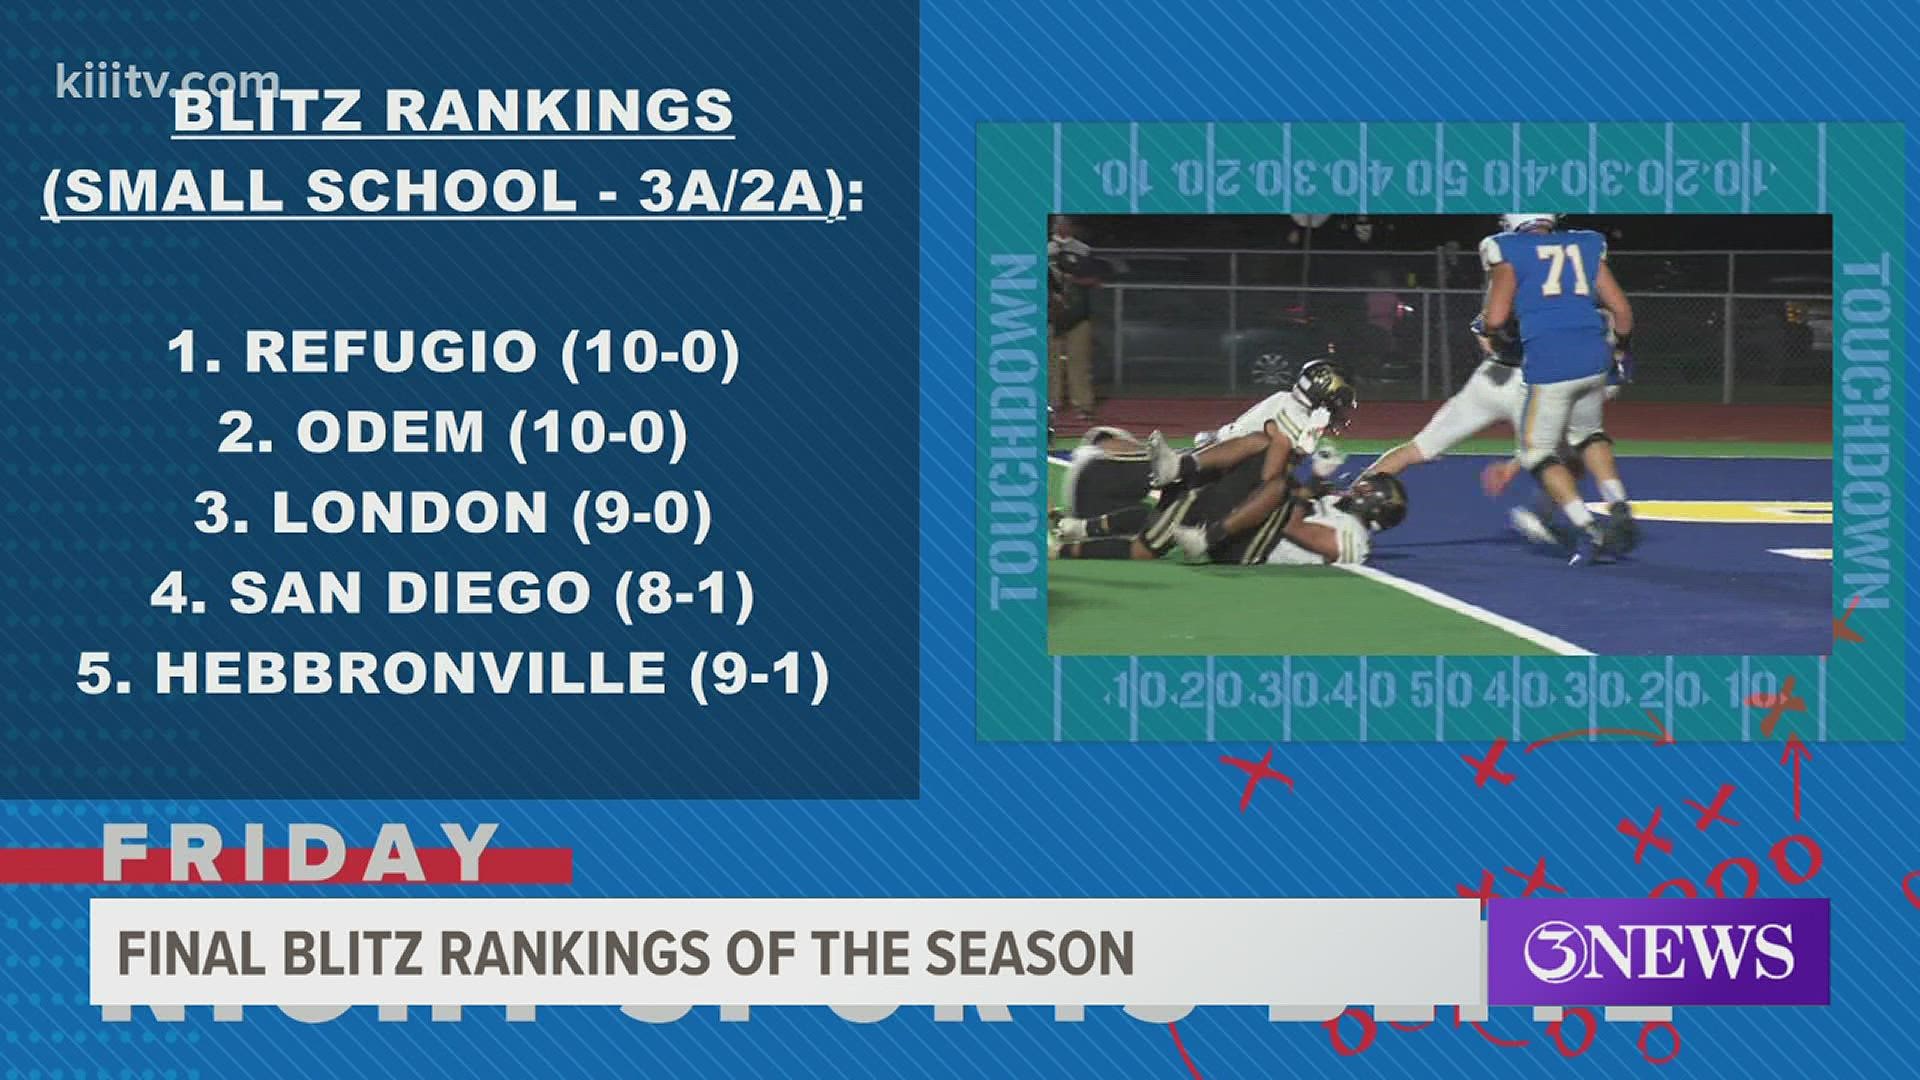 The final rankings of the season see teams that either won district titles or were in the mix for one late.